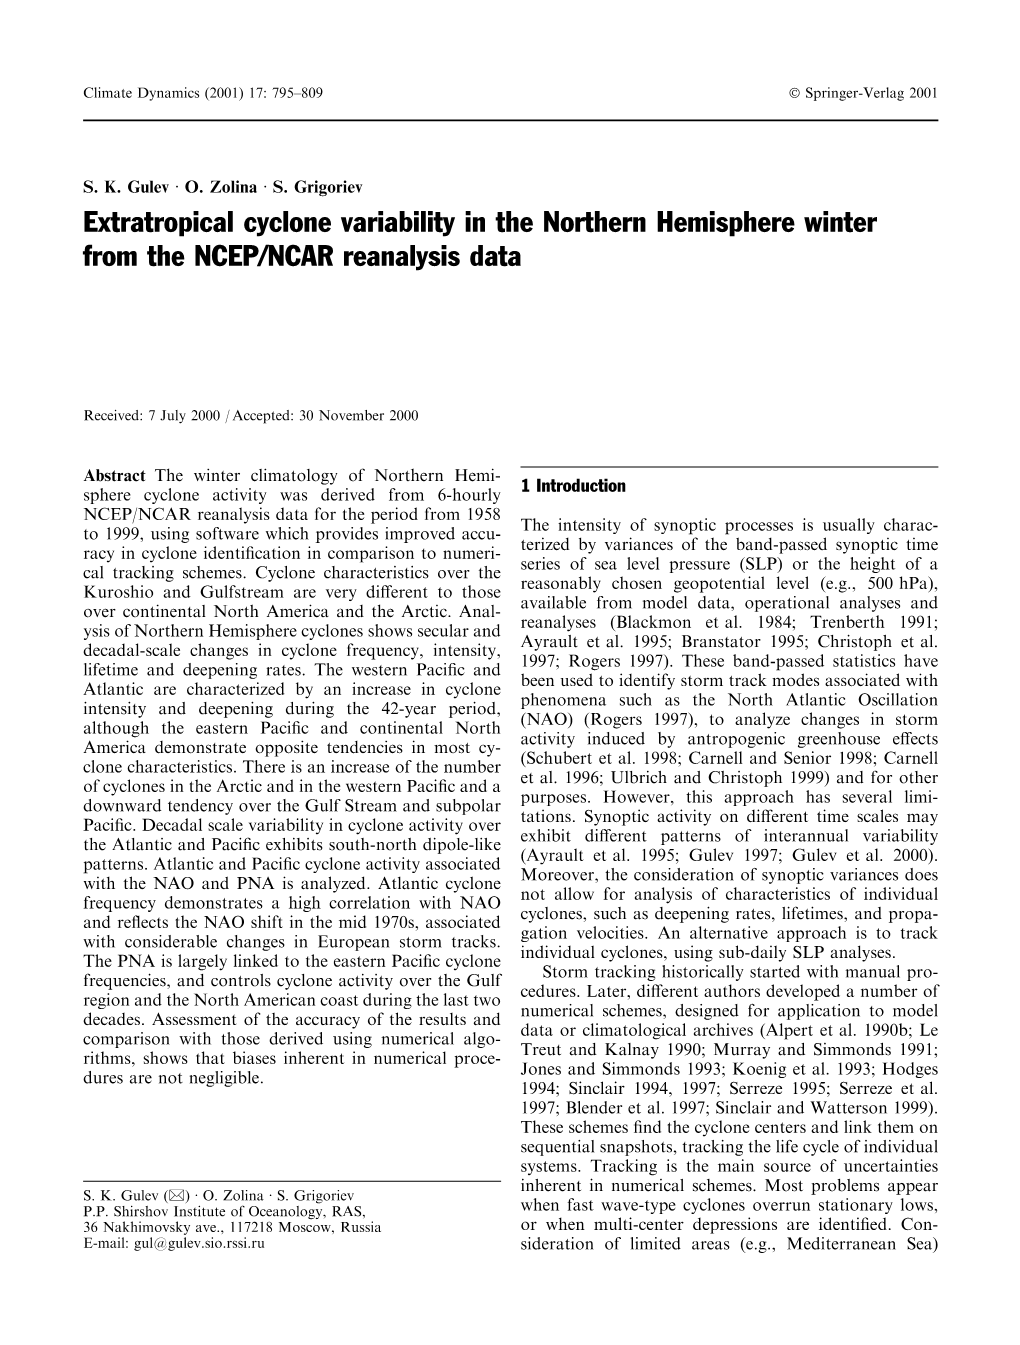 Extratropical Cyclone Variability in the Northern Hemisphere Winter from the NCEP/NCAR Reanalysis Data